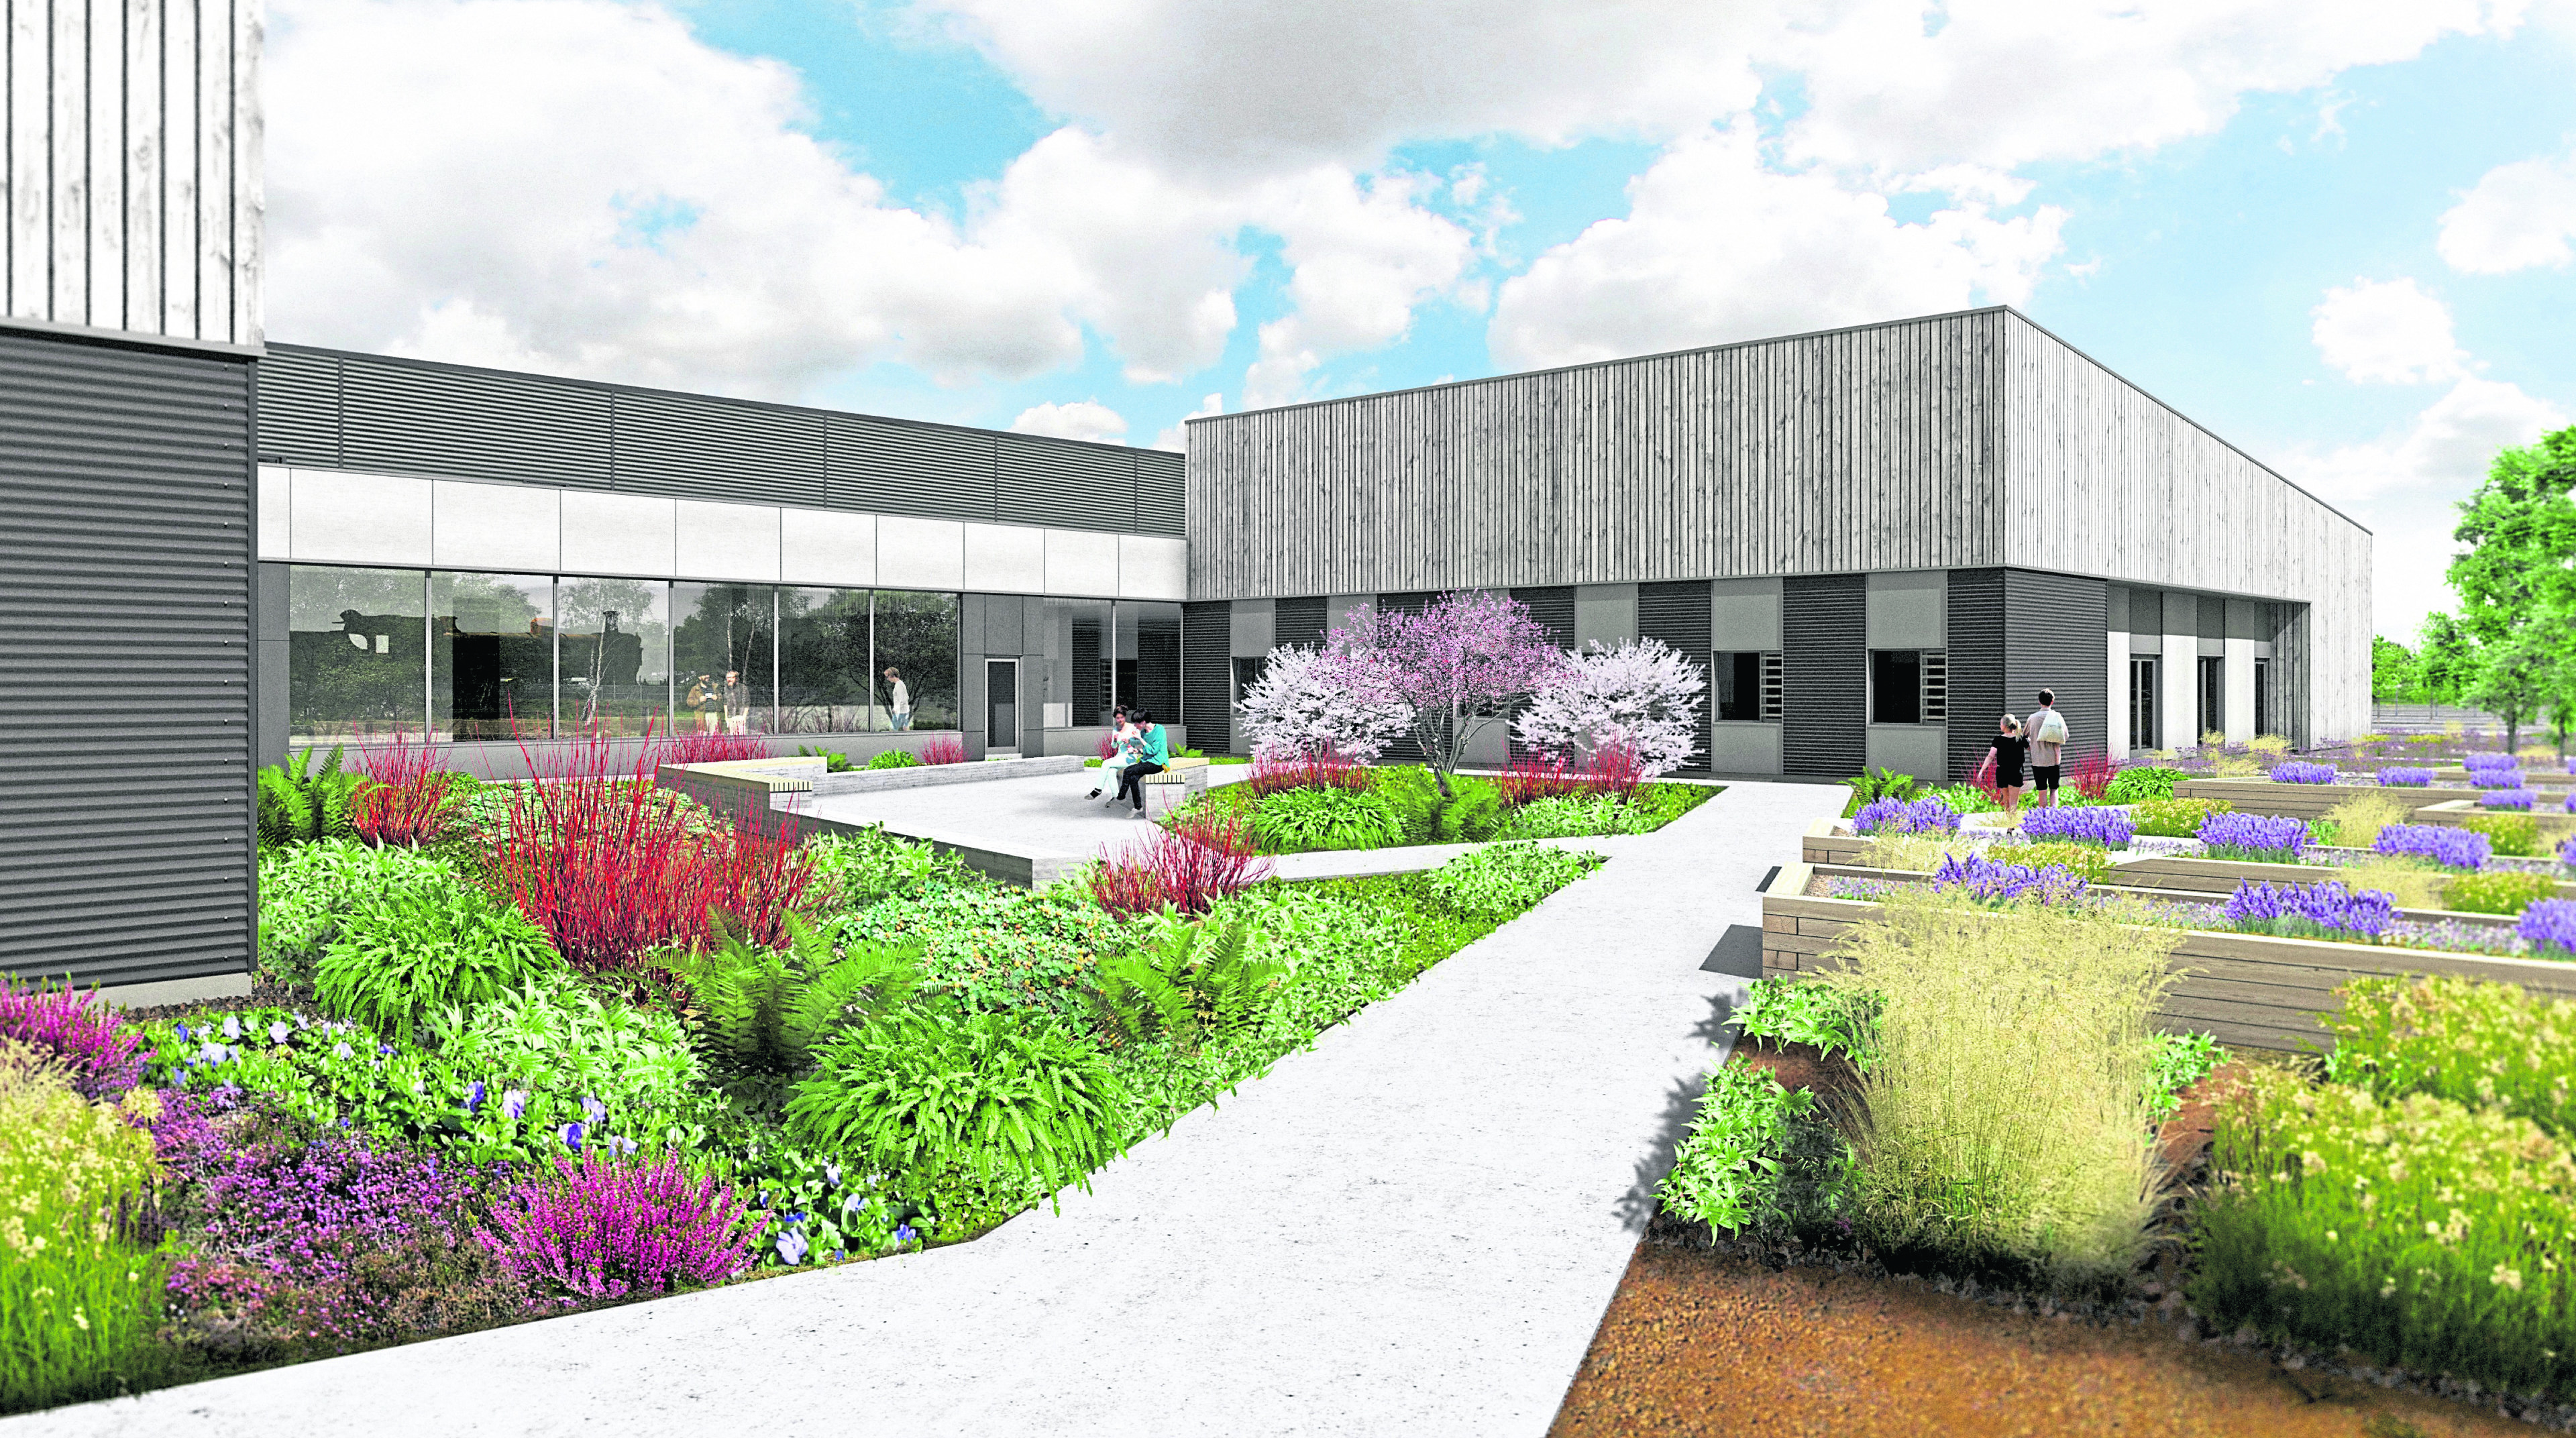 Artist impressions of a new hospital in Aviemore